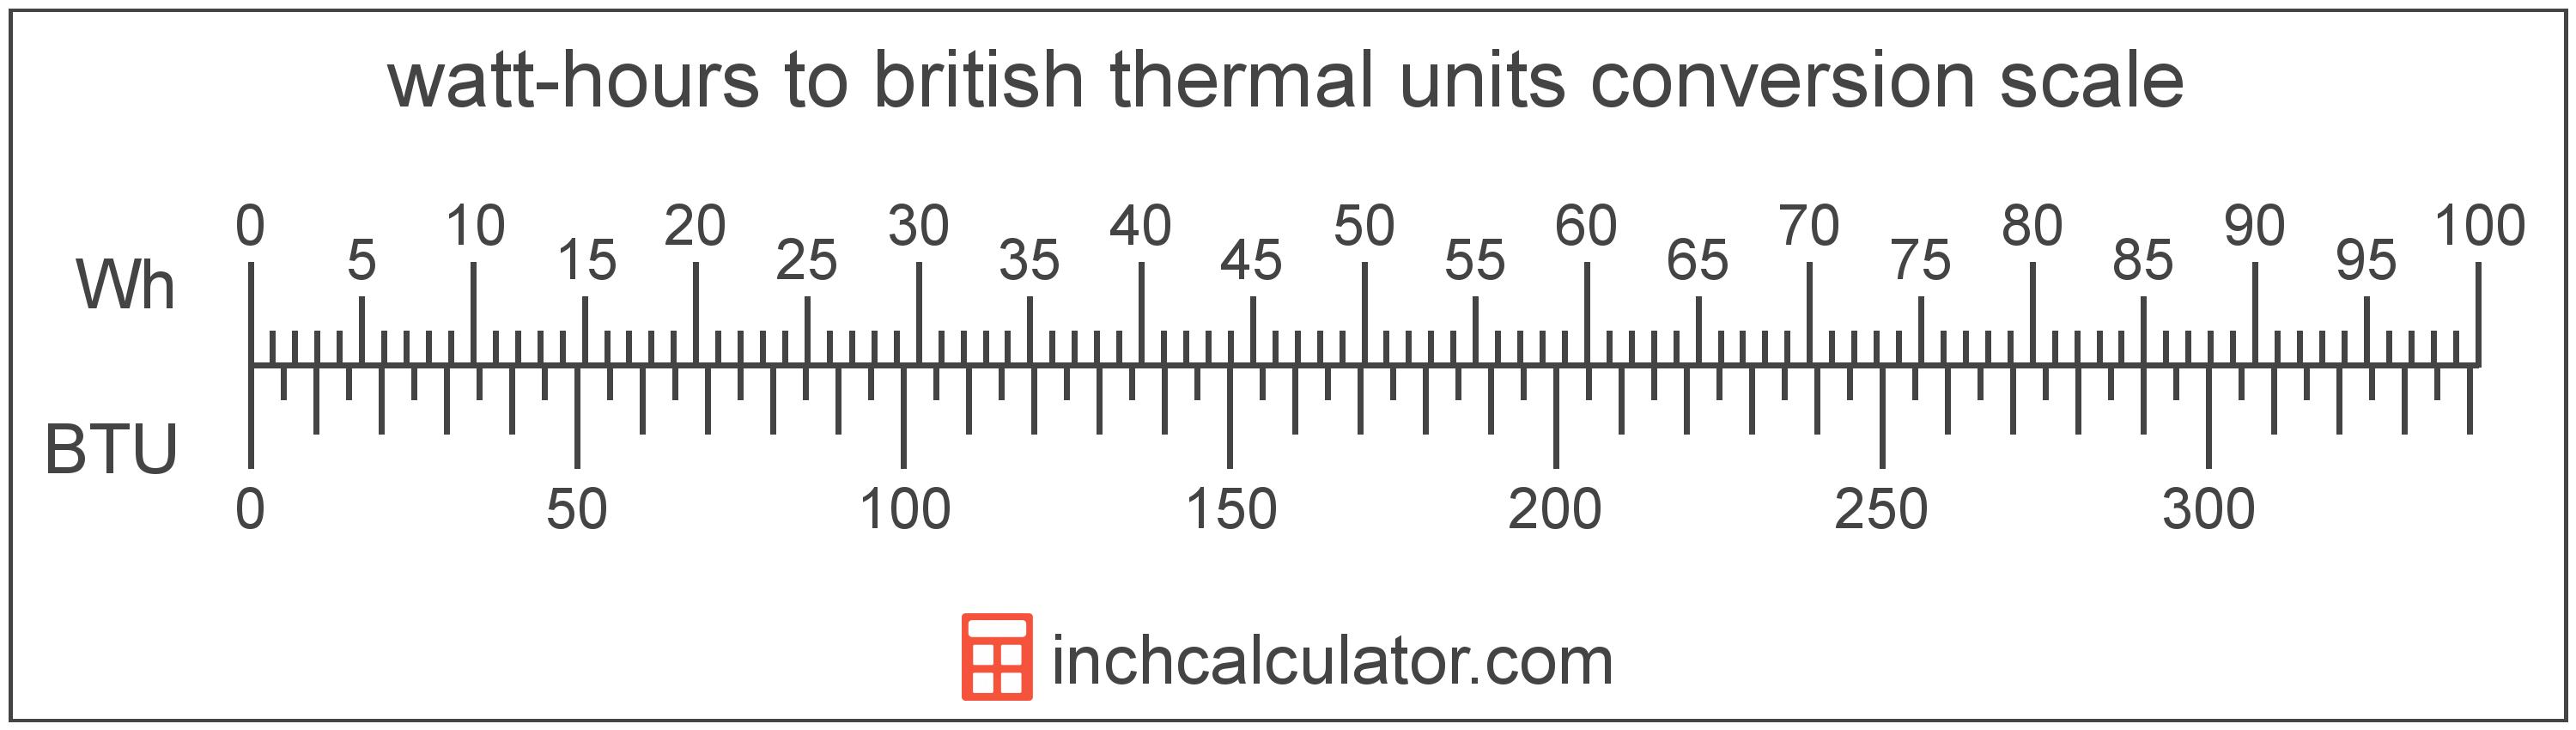 conversion scale showing british thermal units and equivalent watt-hours energy values